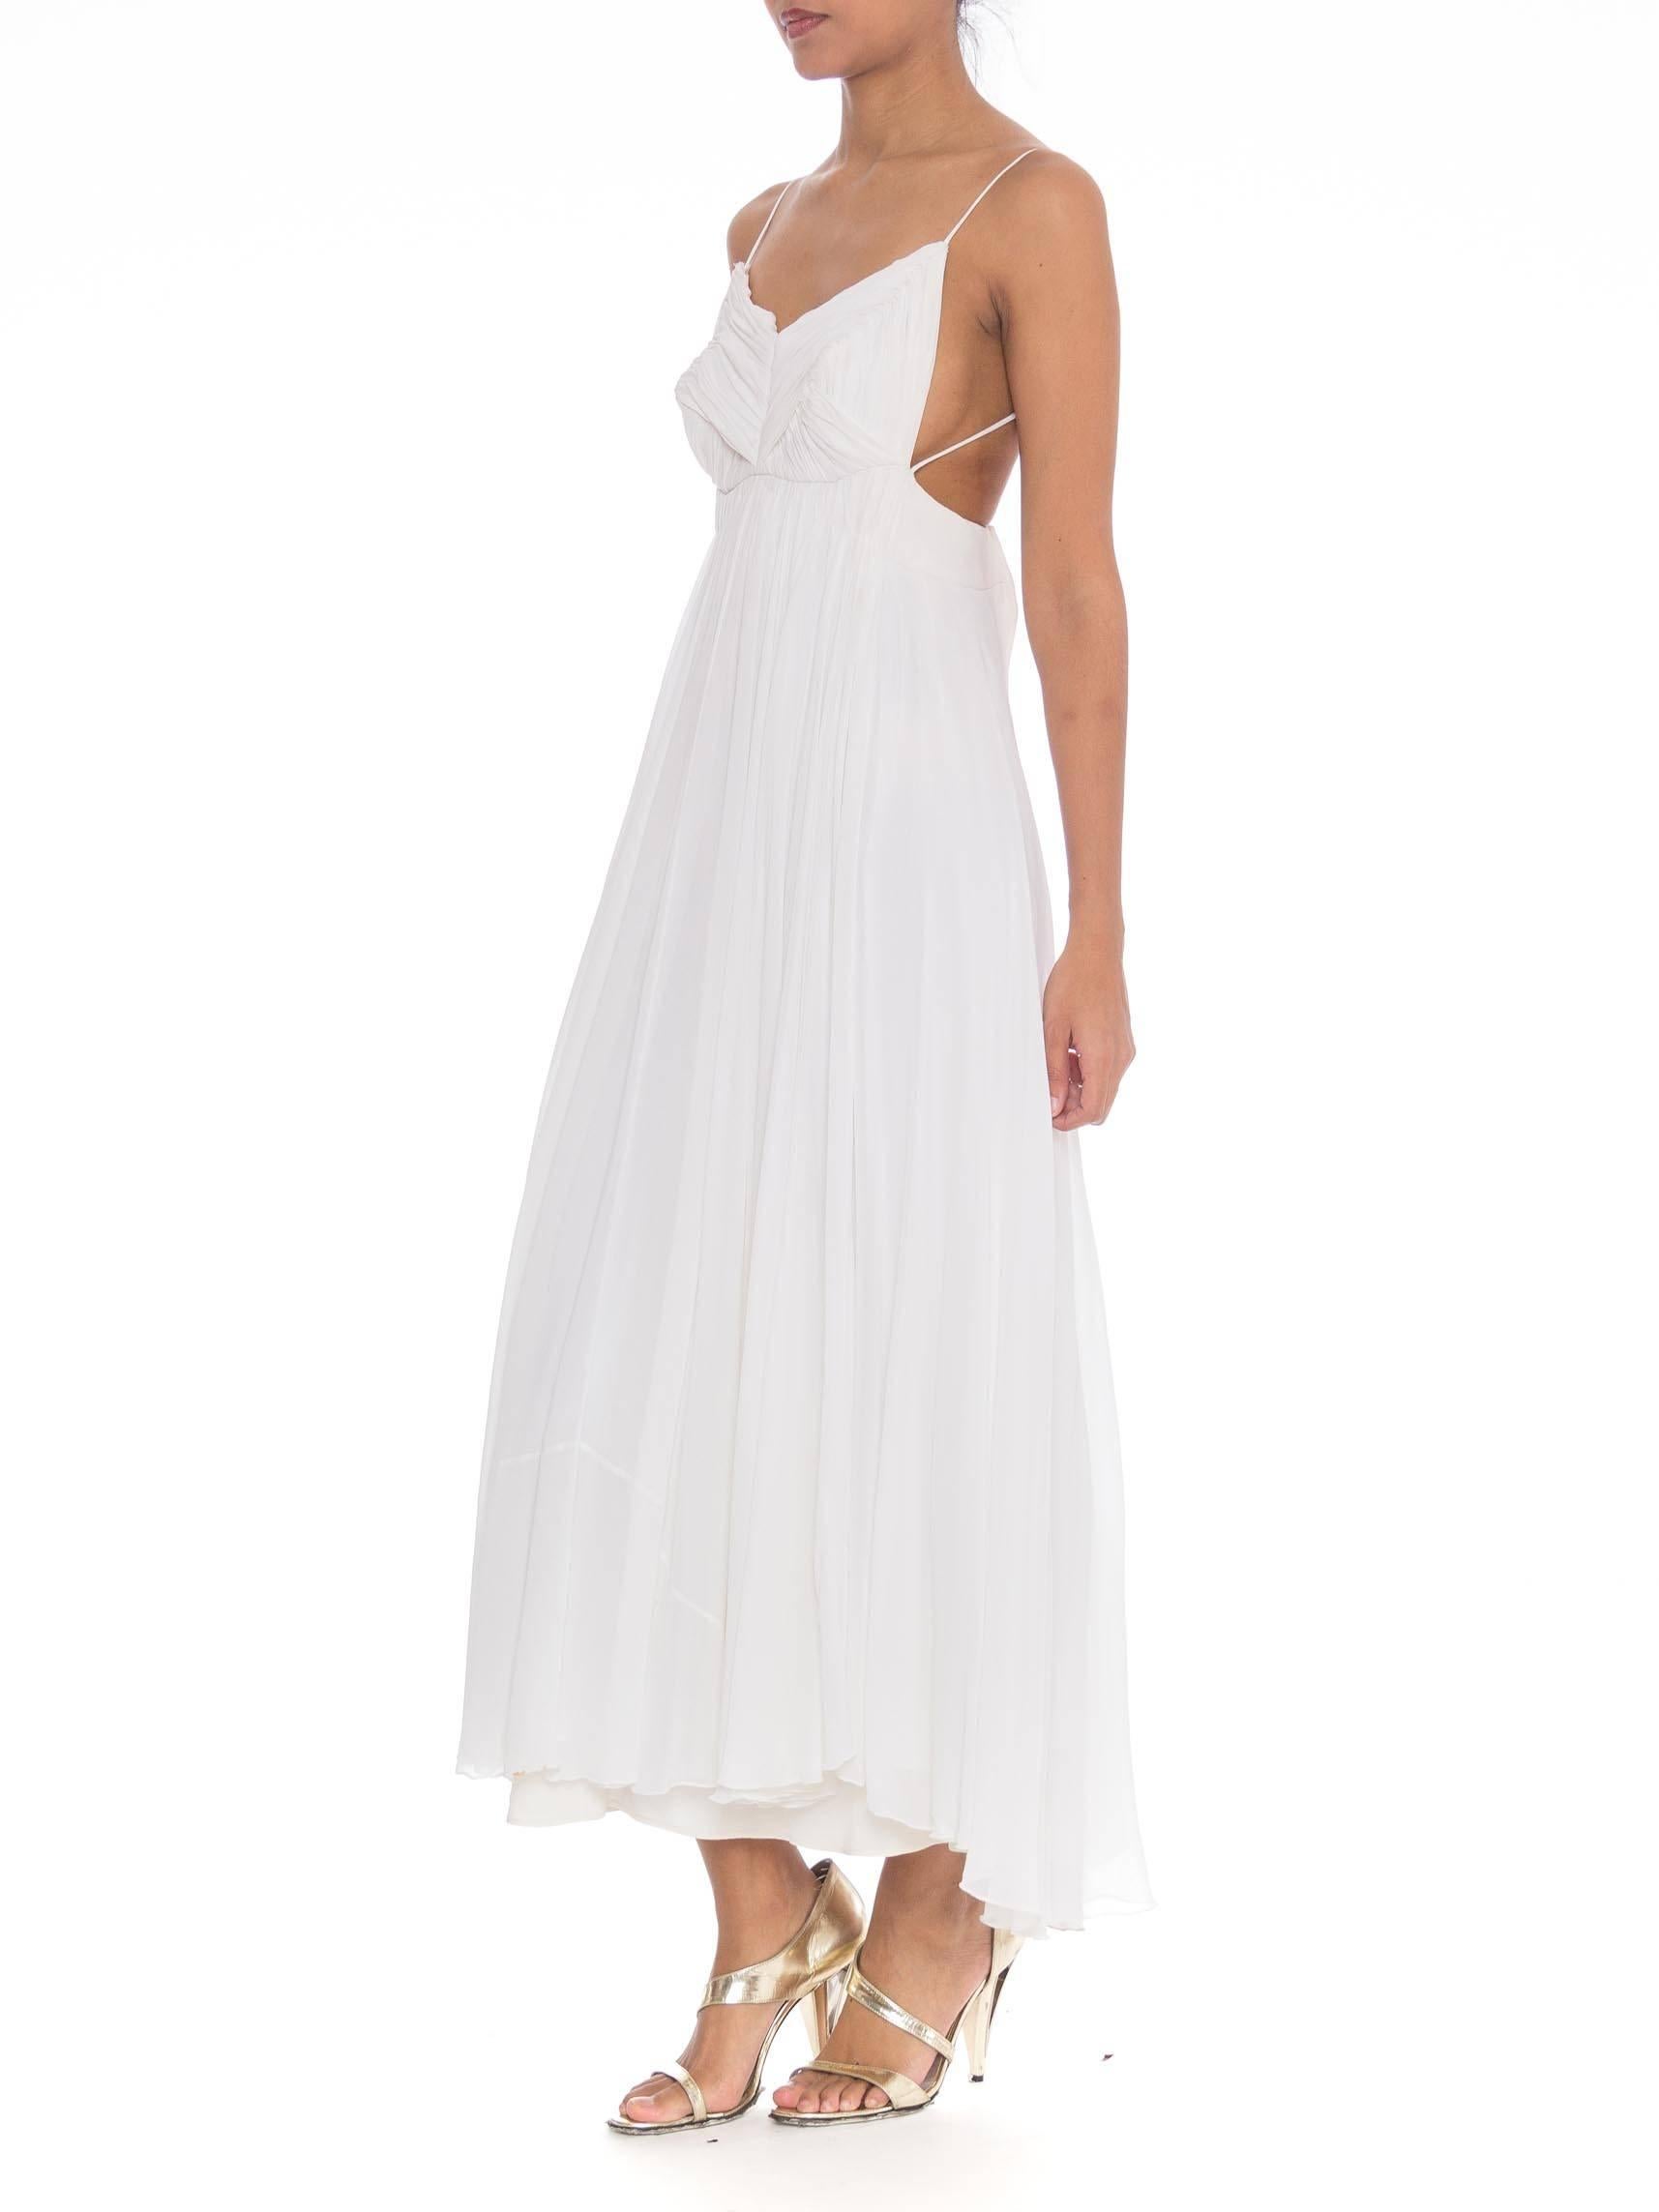 Exquisite Madame Gres Style Pleated Chiffon Dress 1